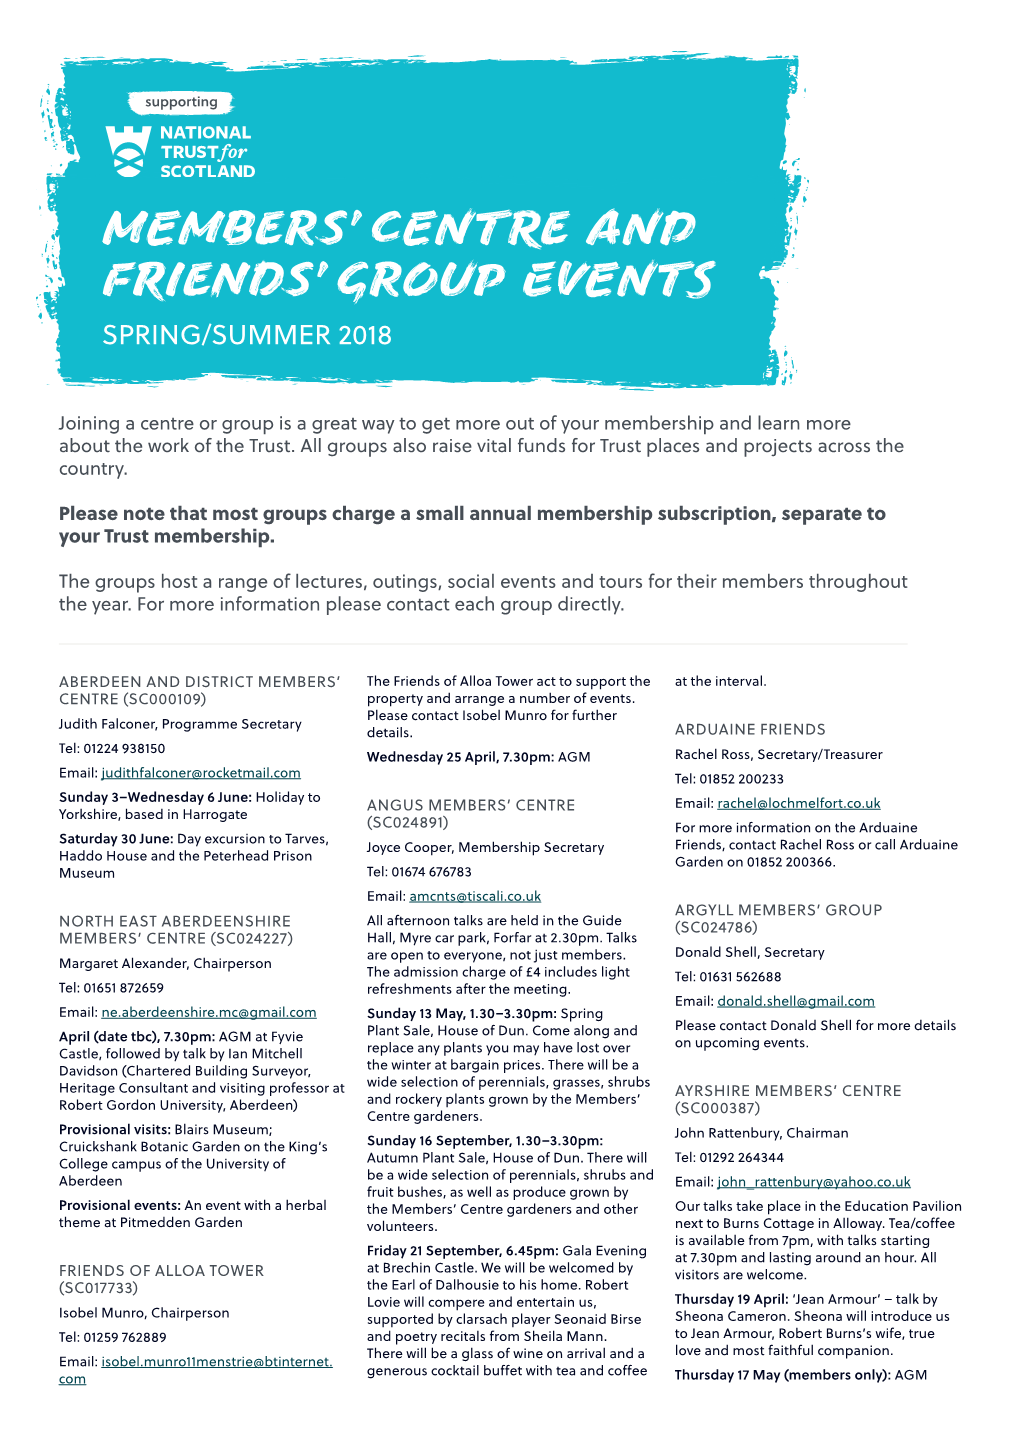 Members' Centre and Friends' Group Events